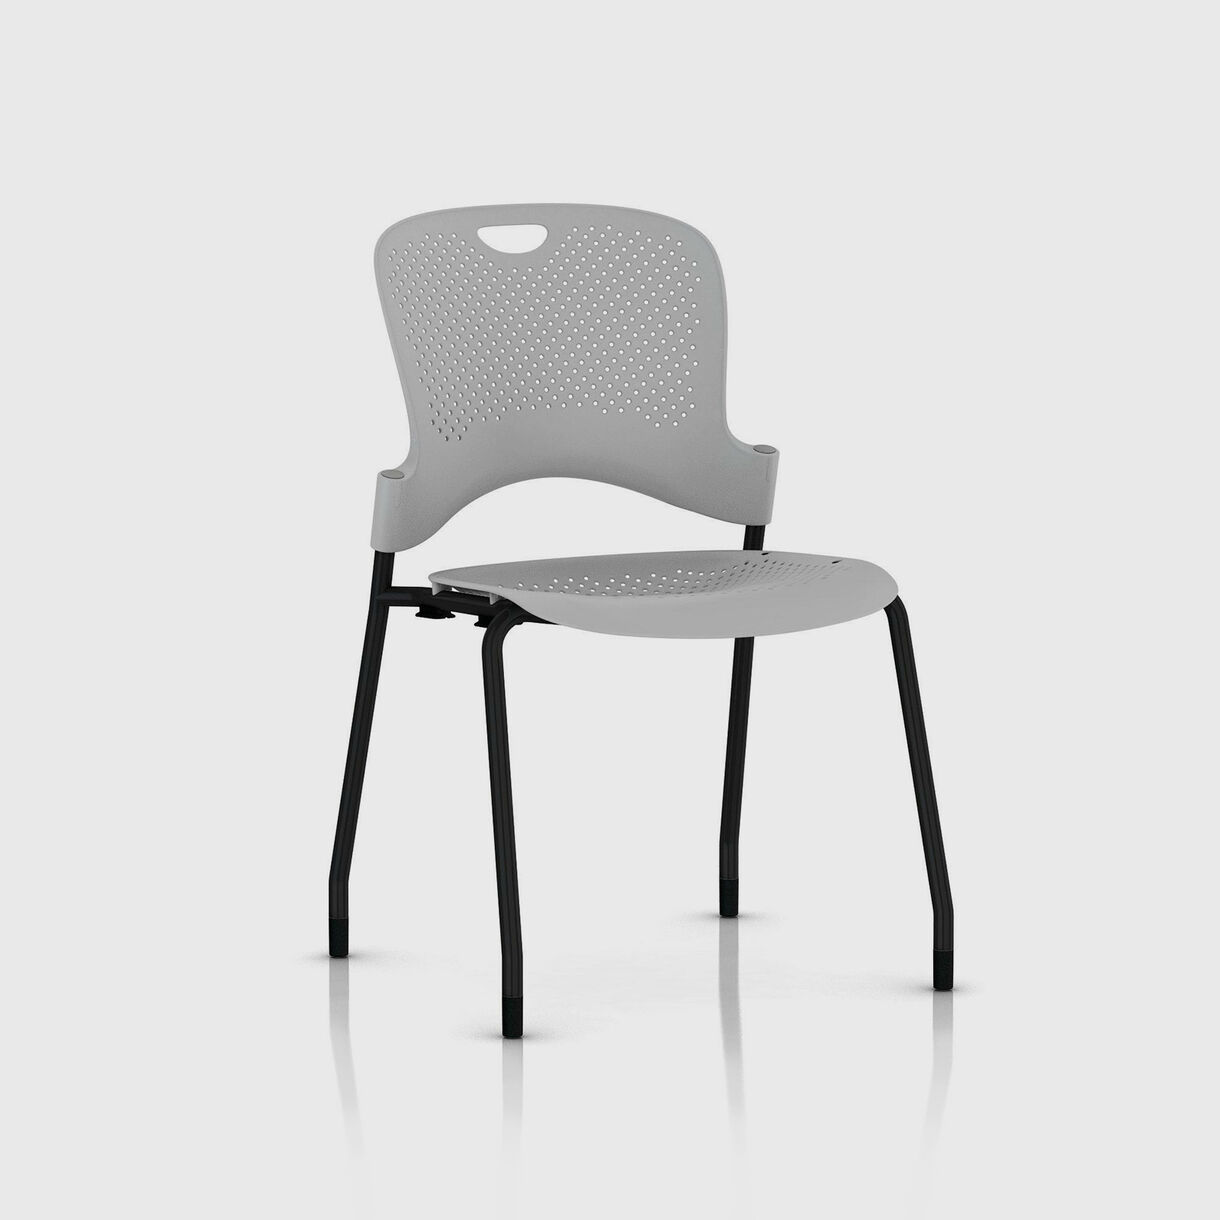 Caper Stacking Chair, Moulded Seat - Fog & Black with Glides - No Arms